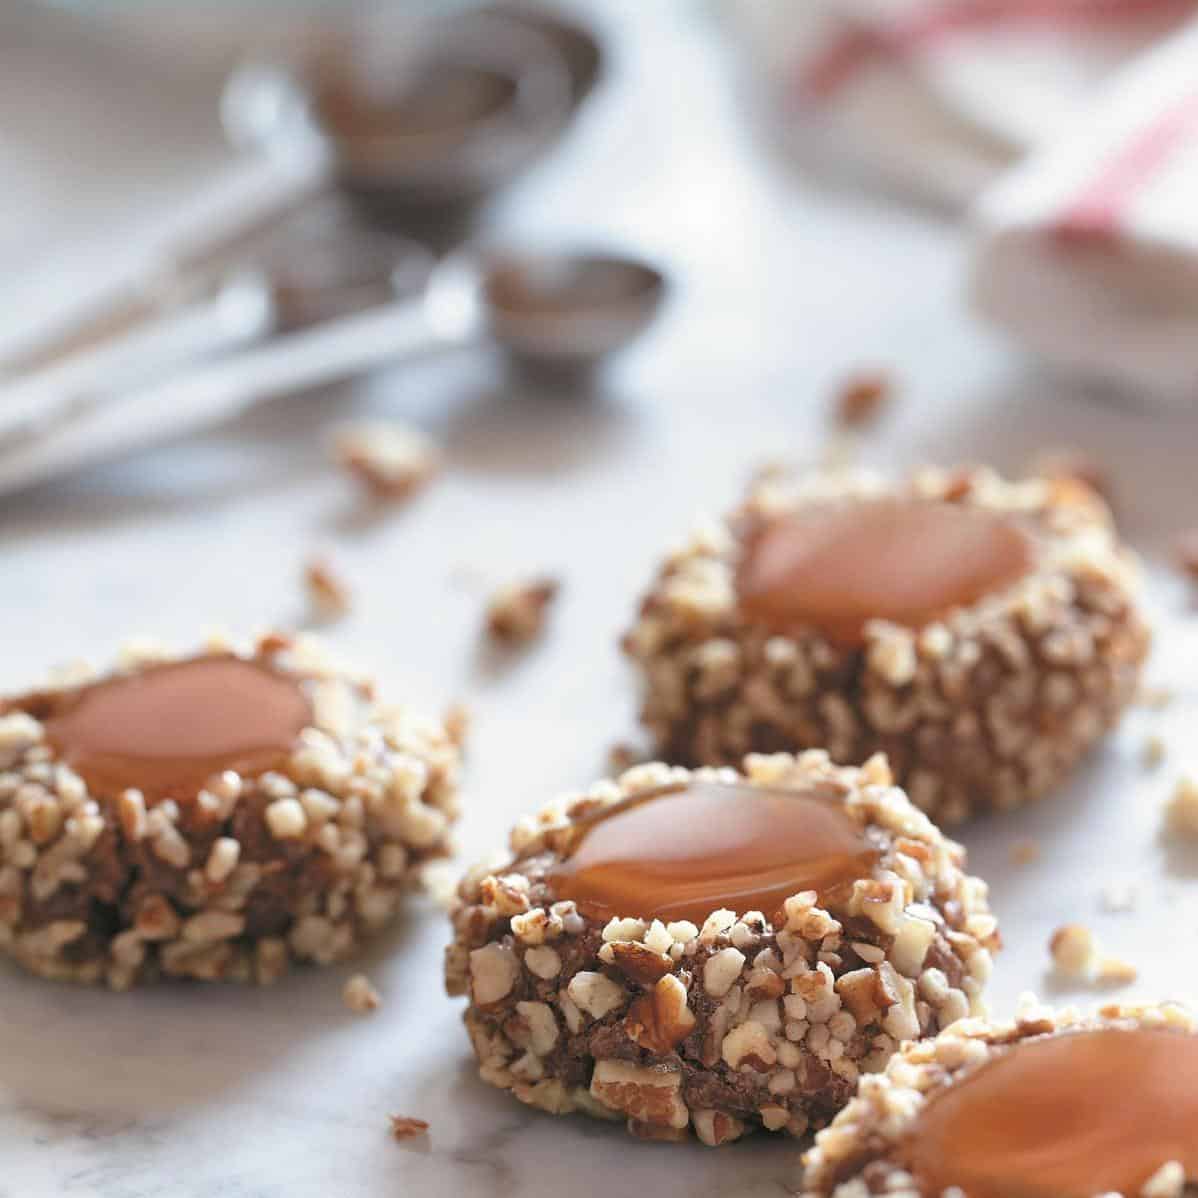  Patience is key when waiting for these delicious treats to cool on the baking sheet.